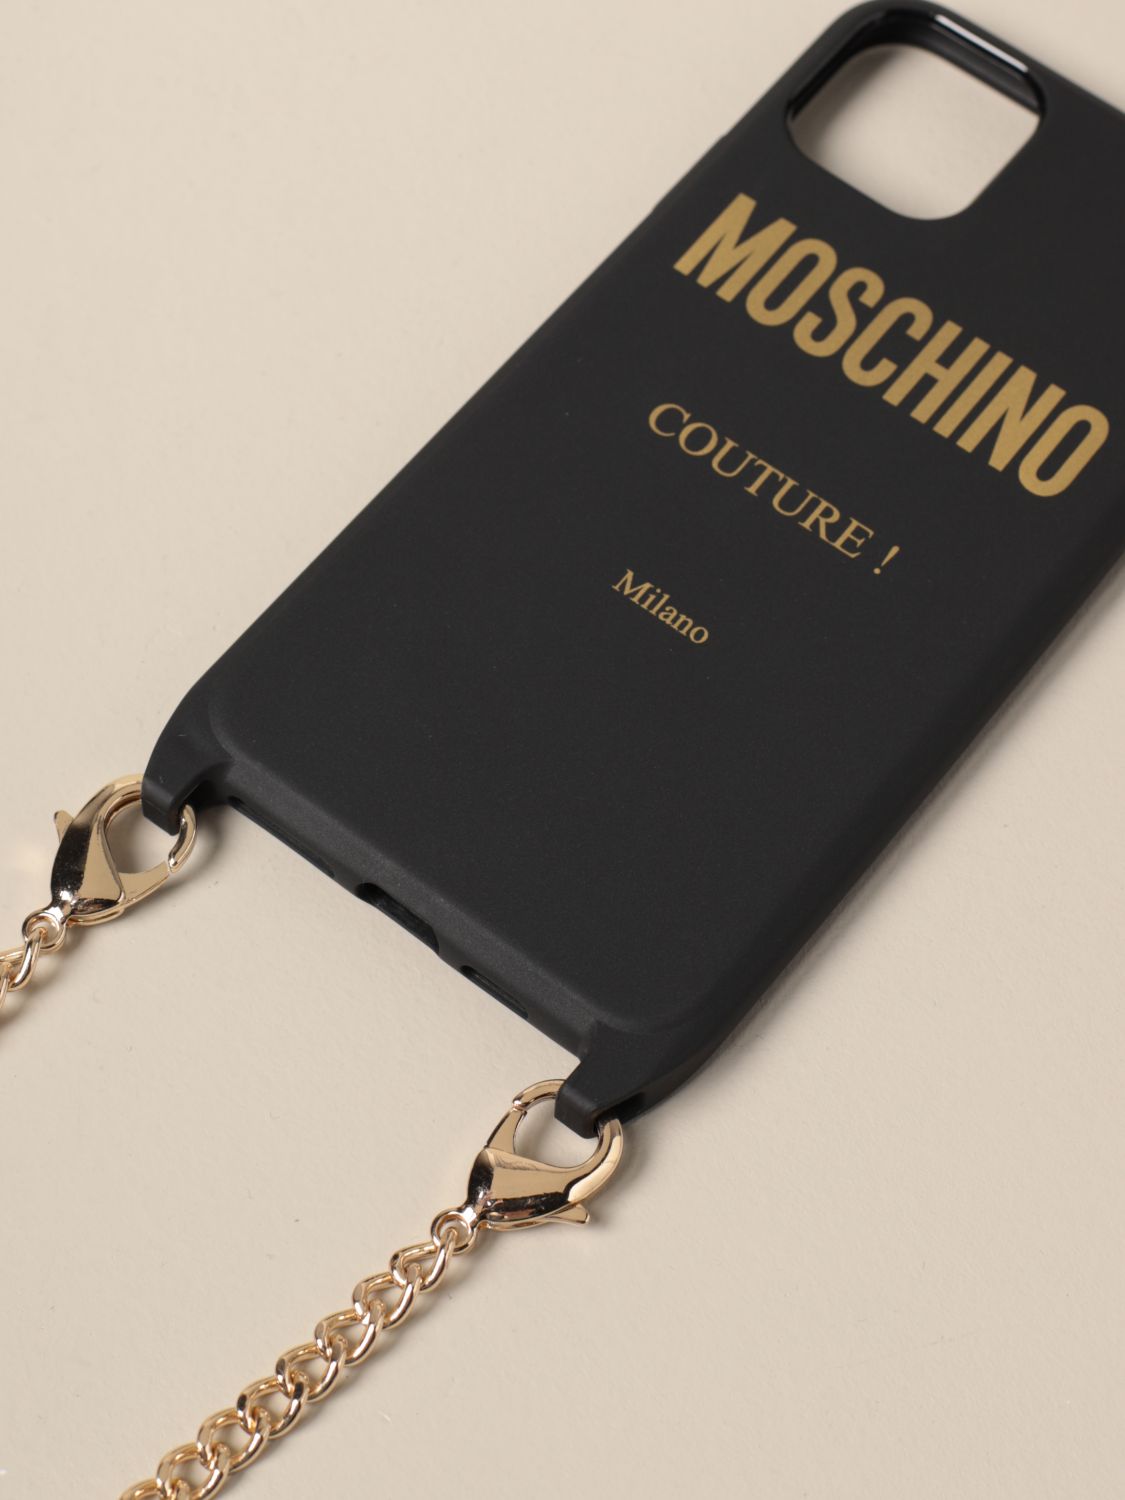 Iphone 11 Pro max Moschino Couture cover | Case Moschino Couture Women